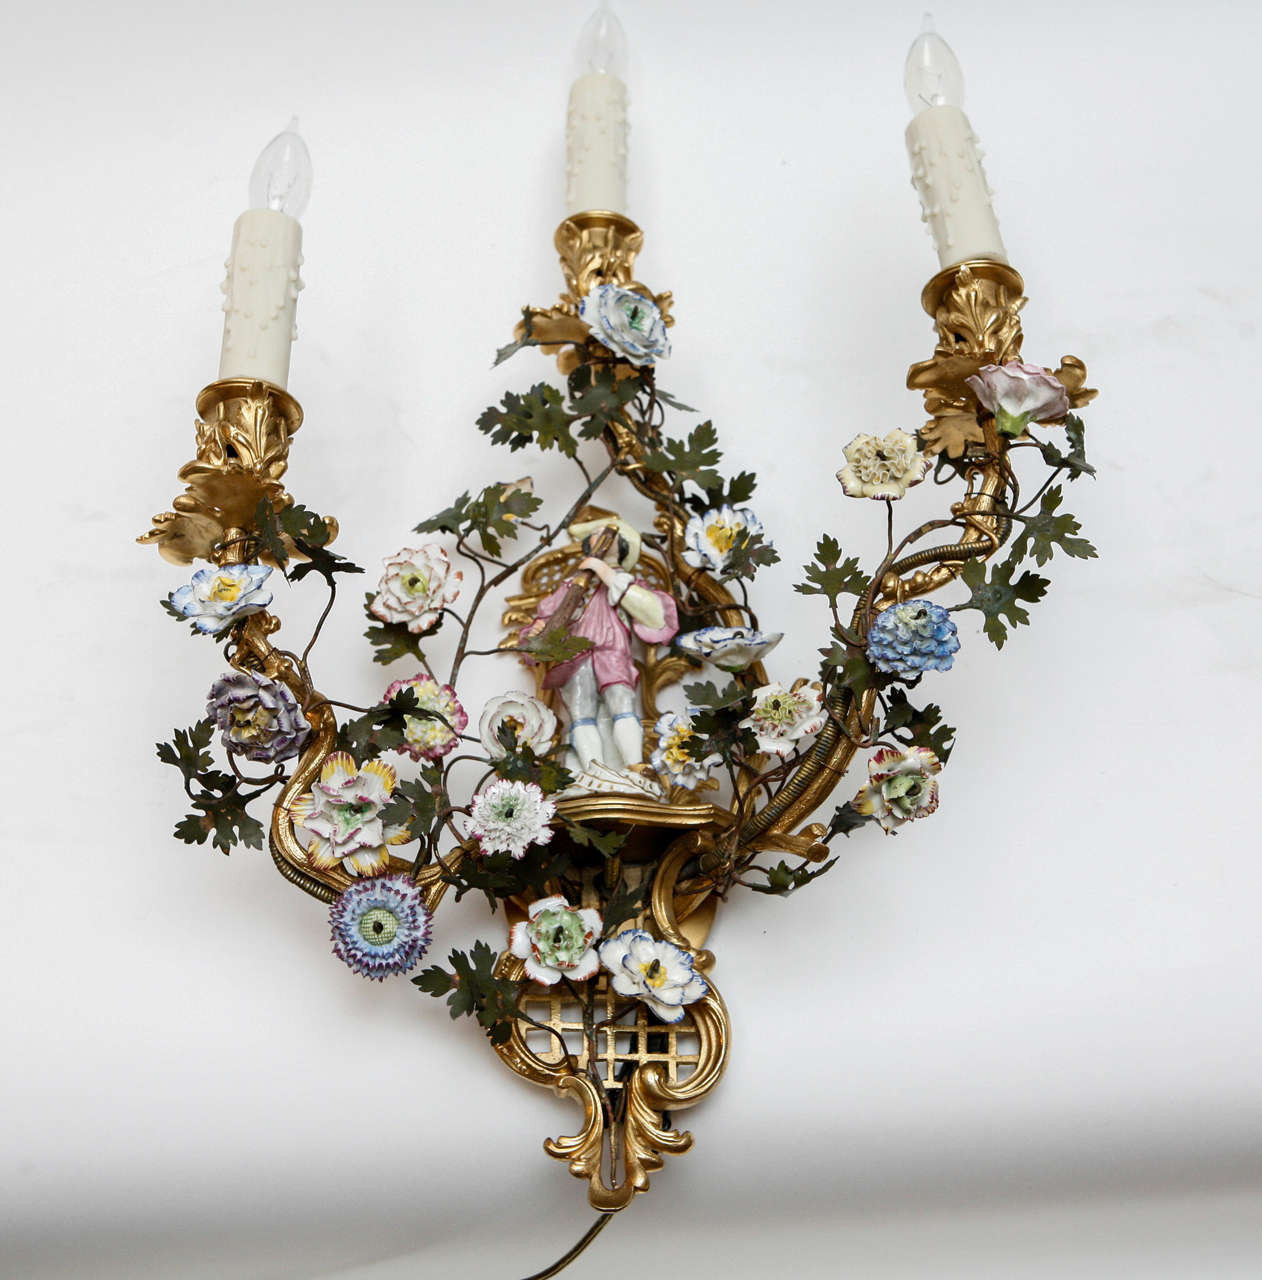 Pair of 19th c. French Porcelain Sconces with very finely chased bronze and hand painted flowers/figures and tole leaves. the sconces have been newly wired.